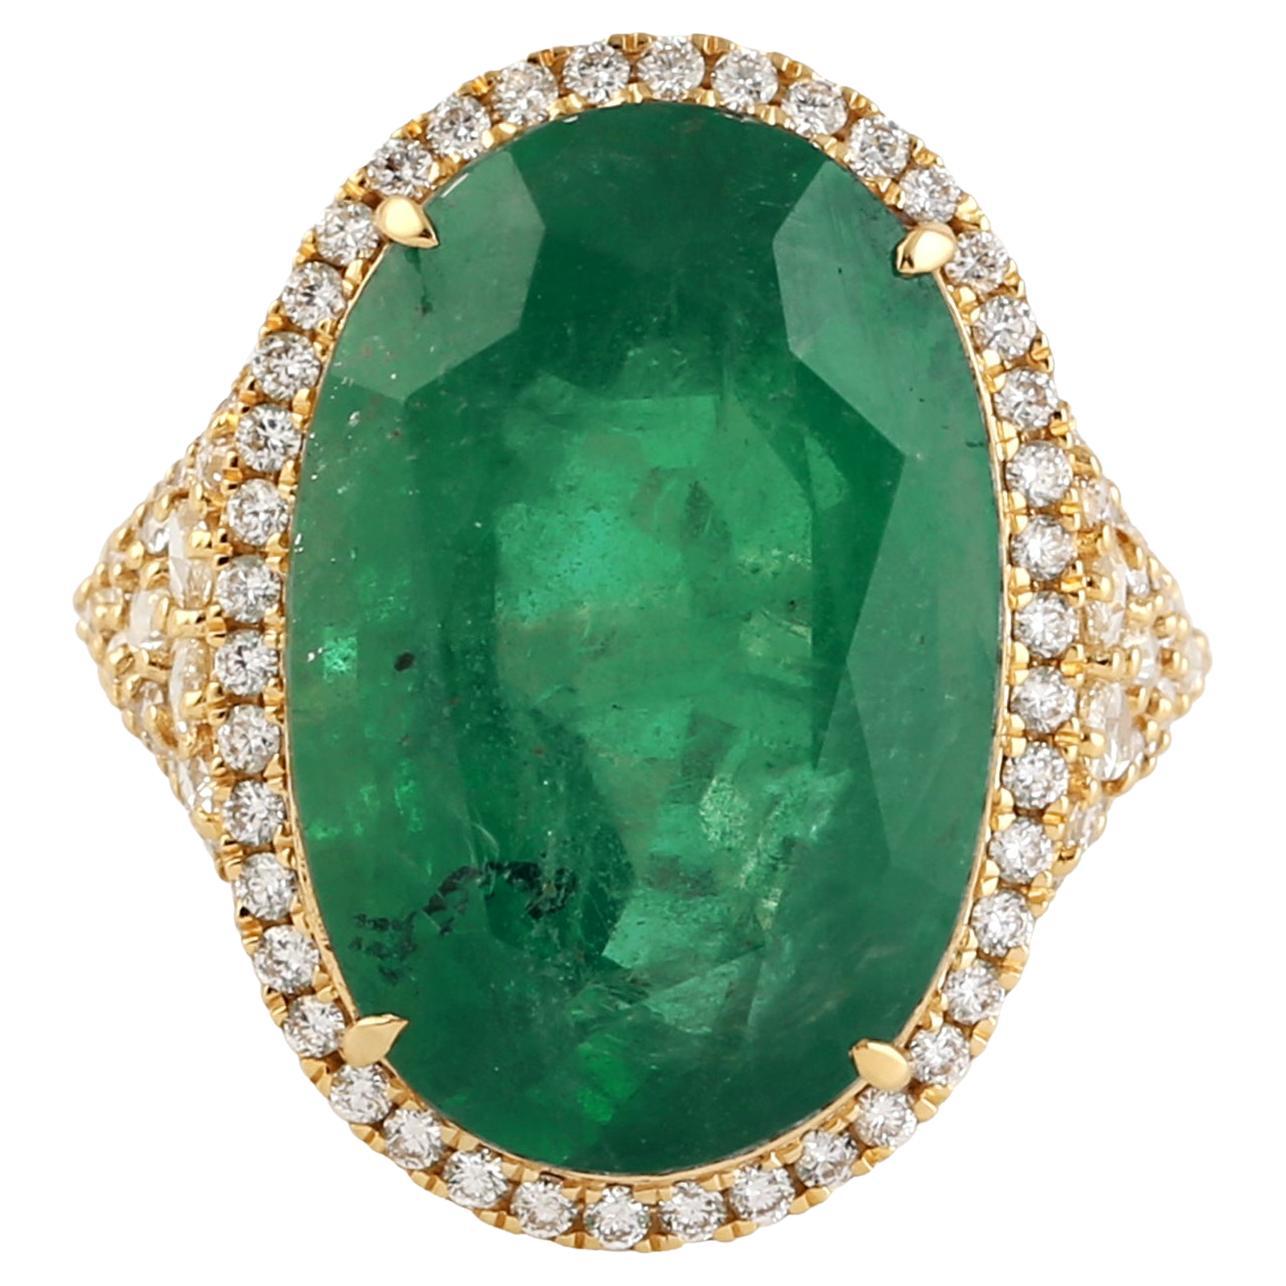 Octogen Shaped Emerald Starburst Ring With Diamonds Made In 18k Yellow ...